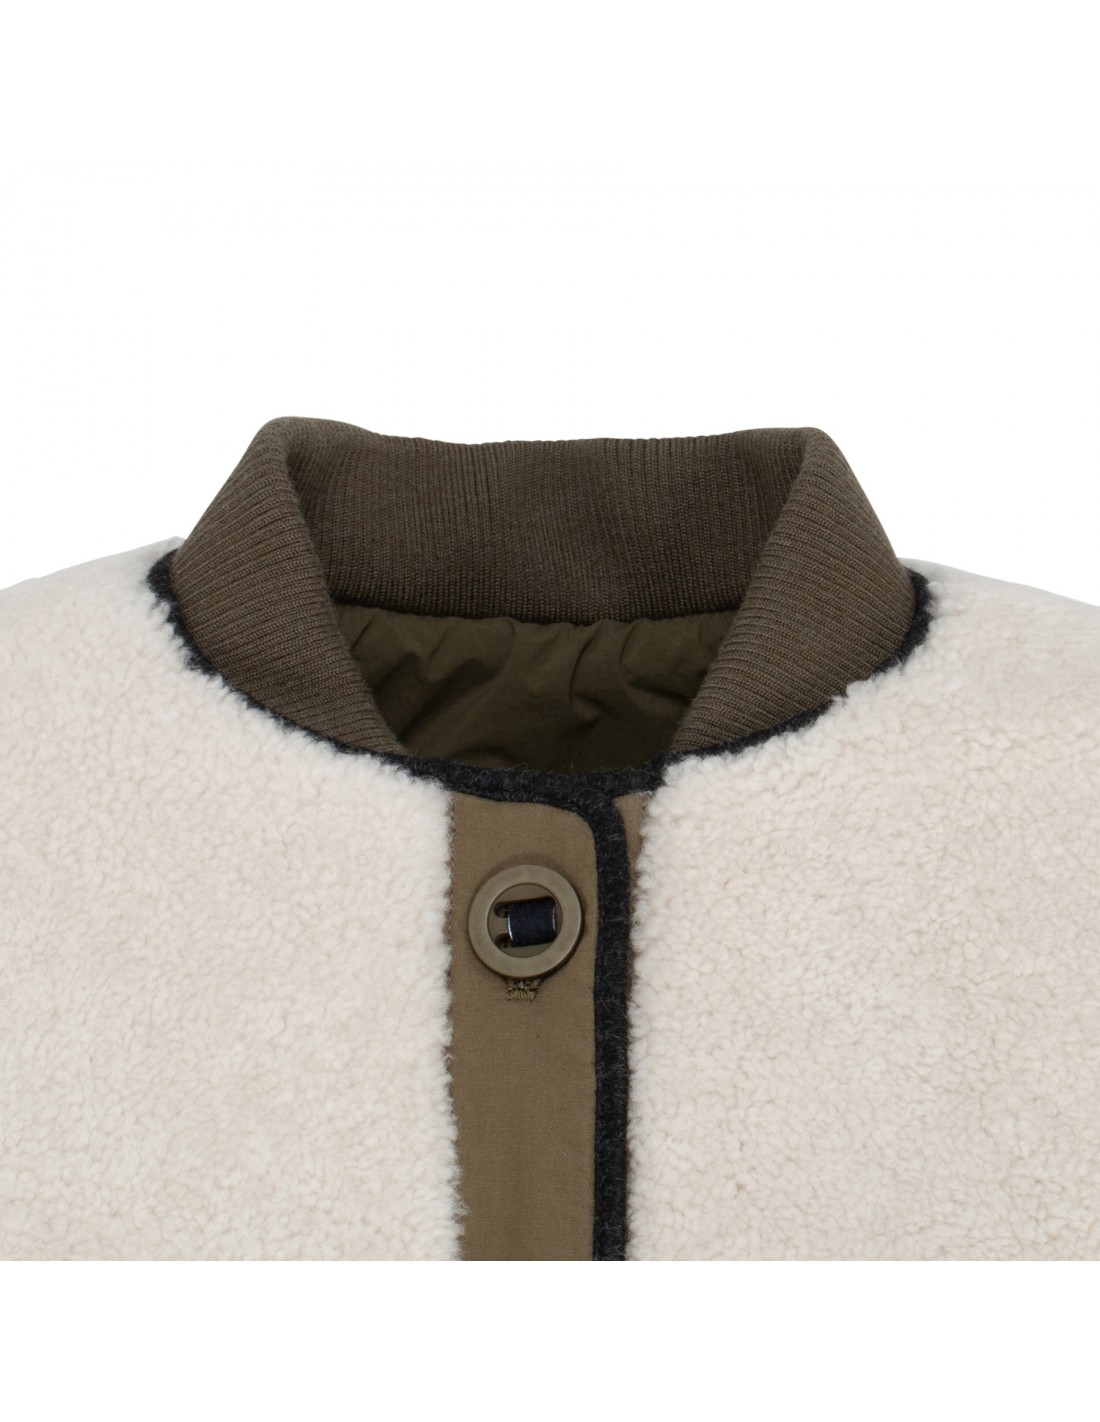 Quilted coat with merino wool panels